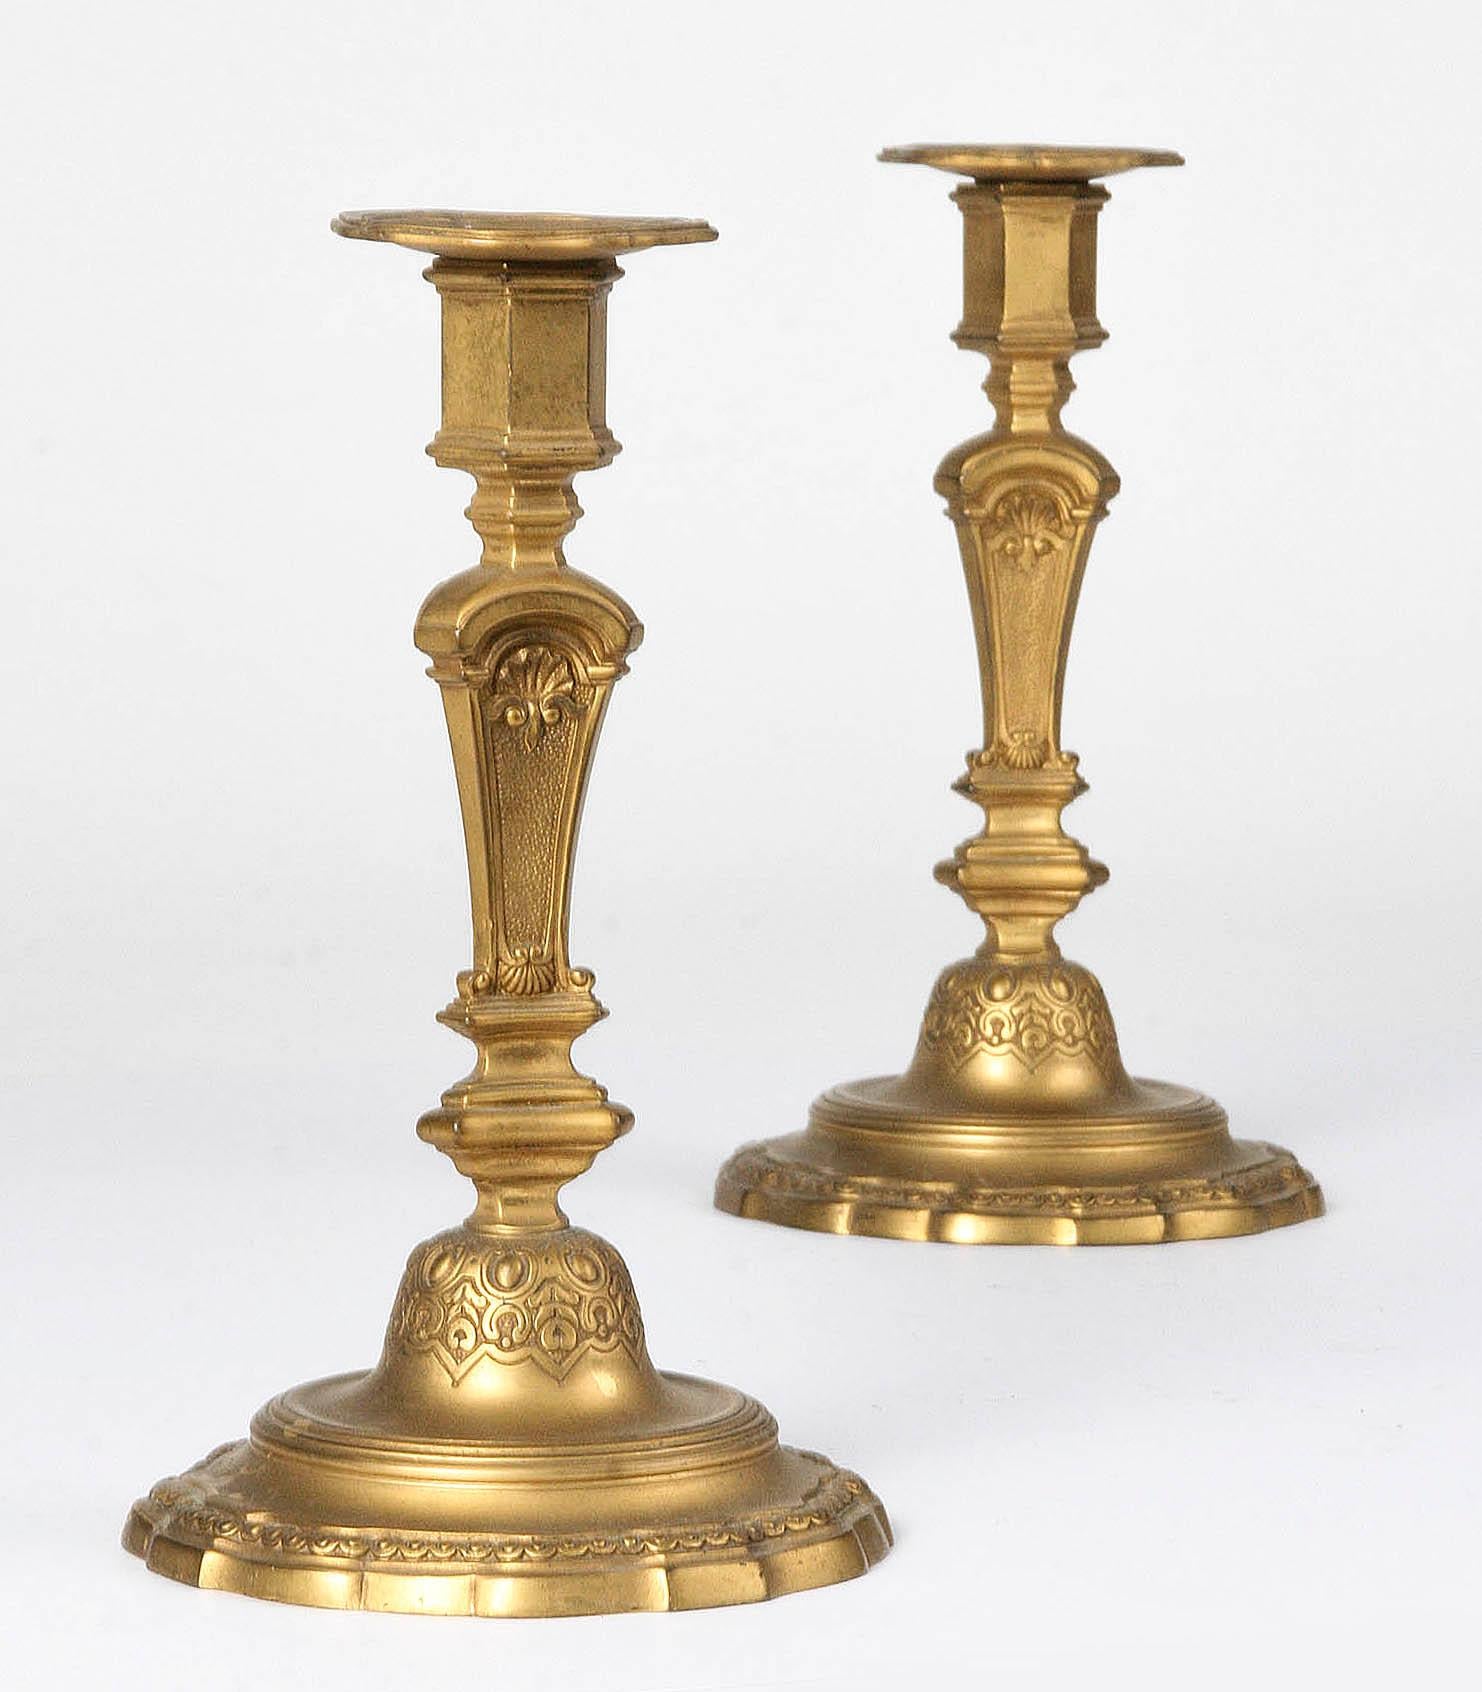 Pair of bronze candlesticks, French Regence style. The candlesticks are made circa 1900. The candlesticks are matte gold and have a beautiful patina because of the original gilding. In good condition.